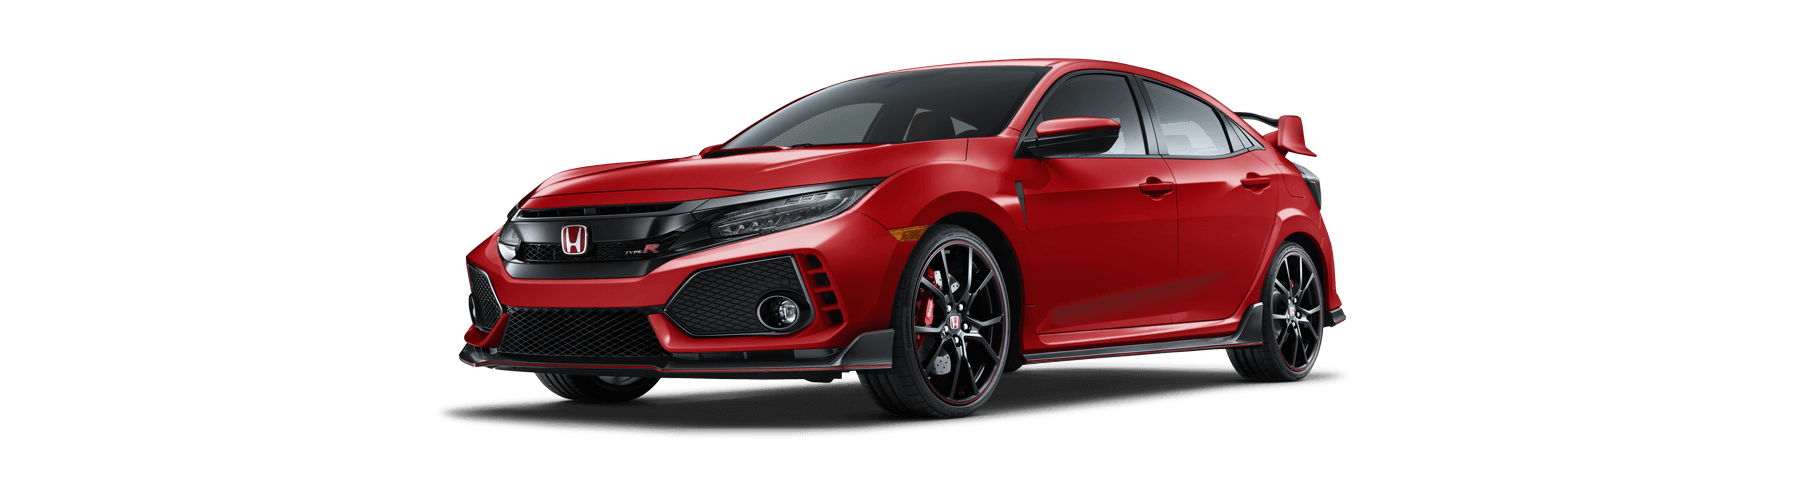 Honda Civic Type R PNG Clipart Background